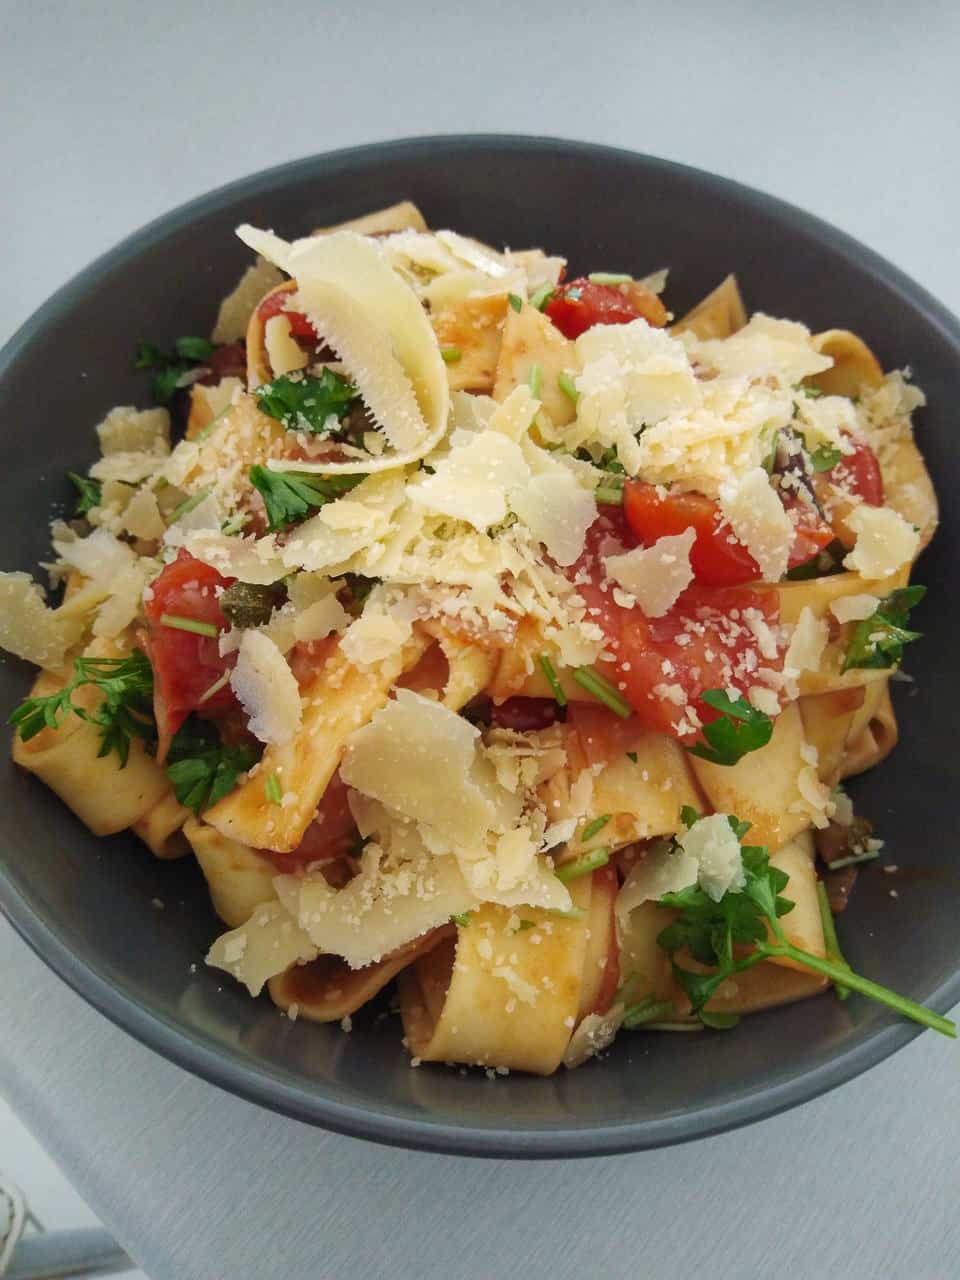 Reduce your food's carbon footprint by eating more vegetarian meals/ My plant-based pappardelle with harissa, black olives & capers // travelmermaid.com